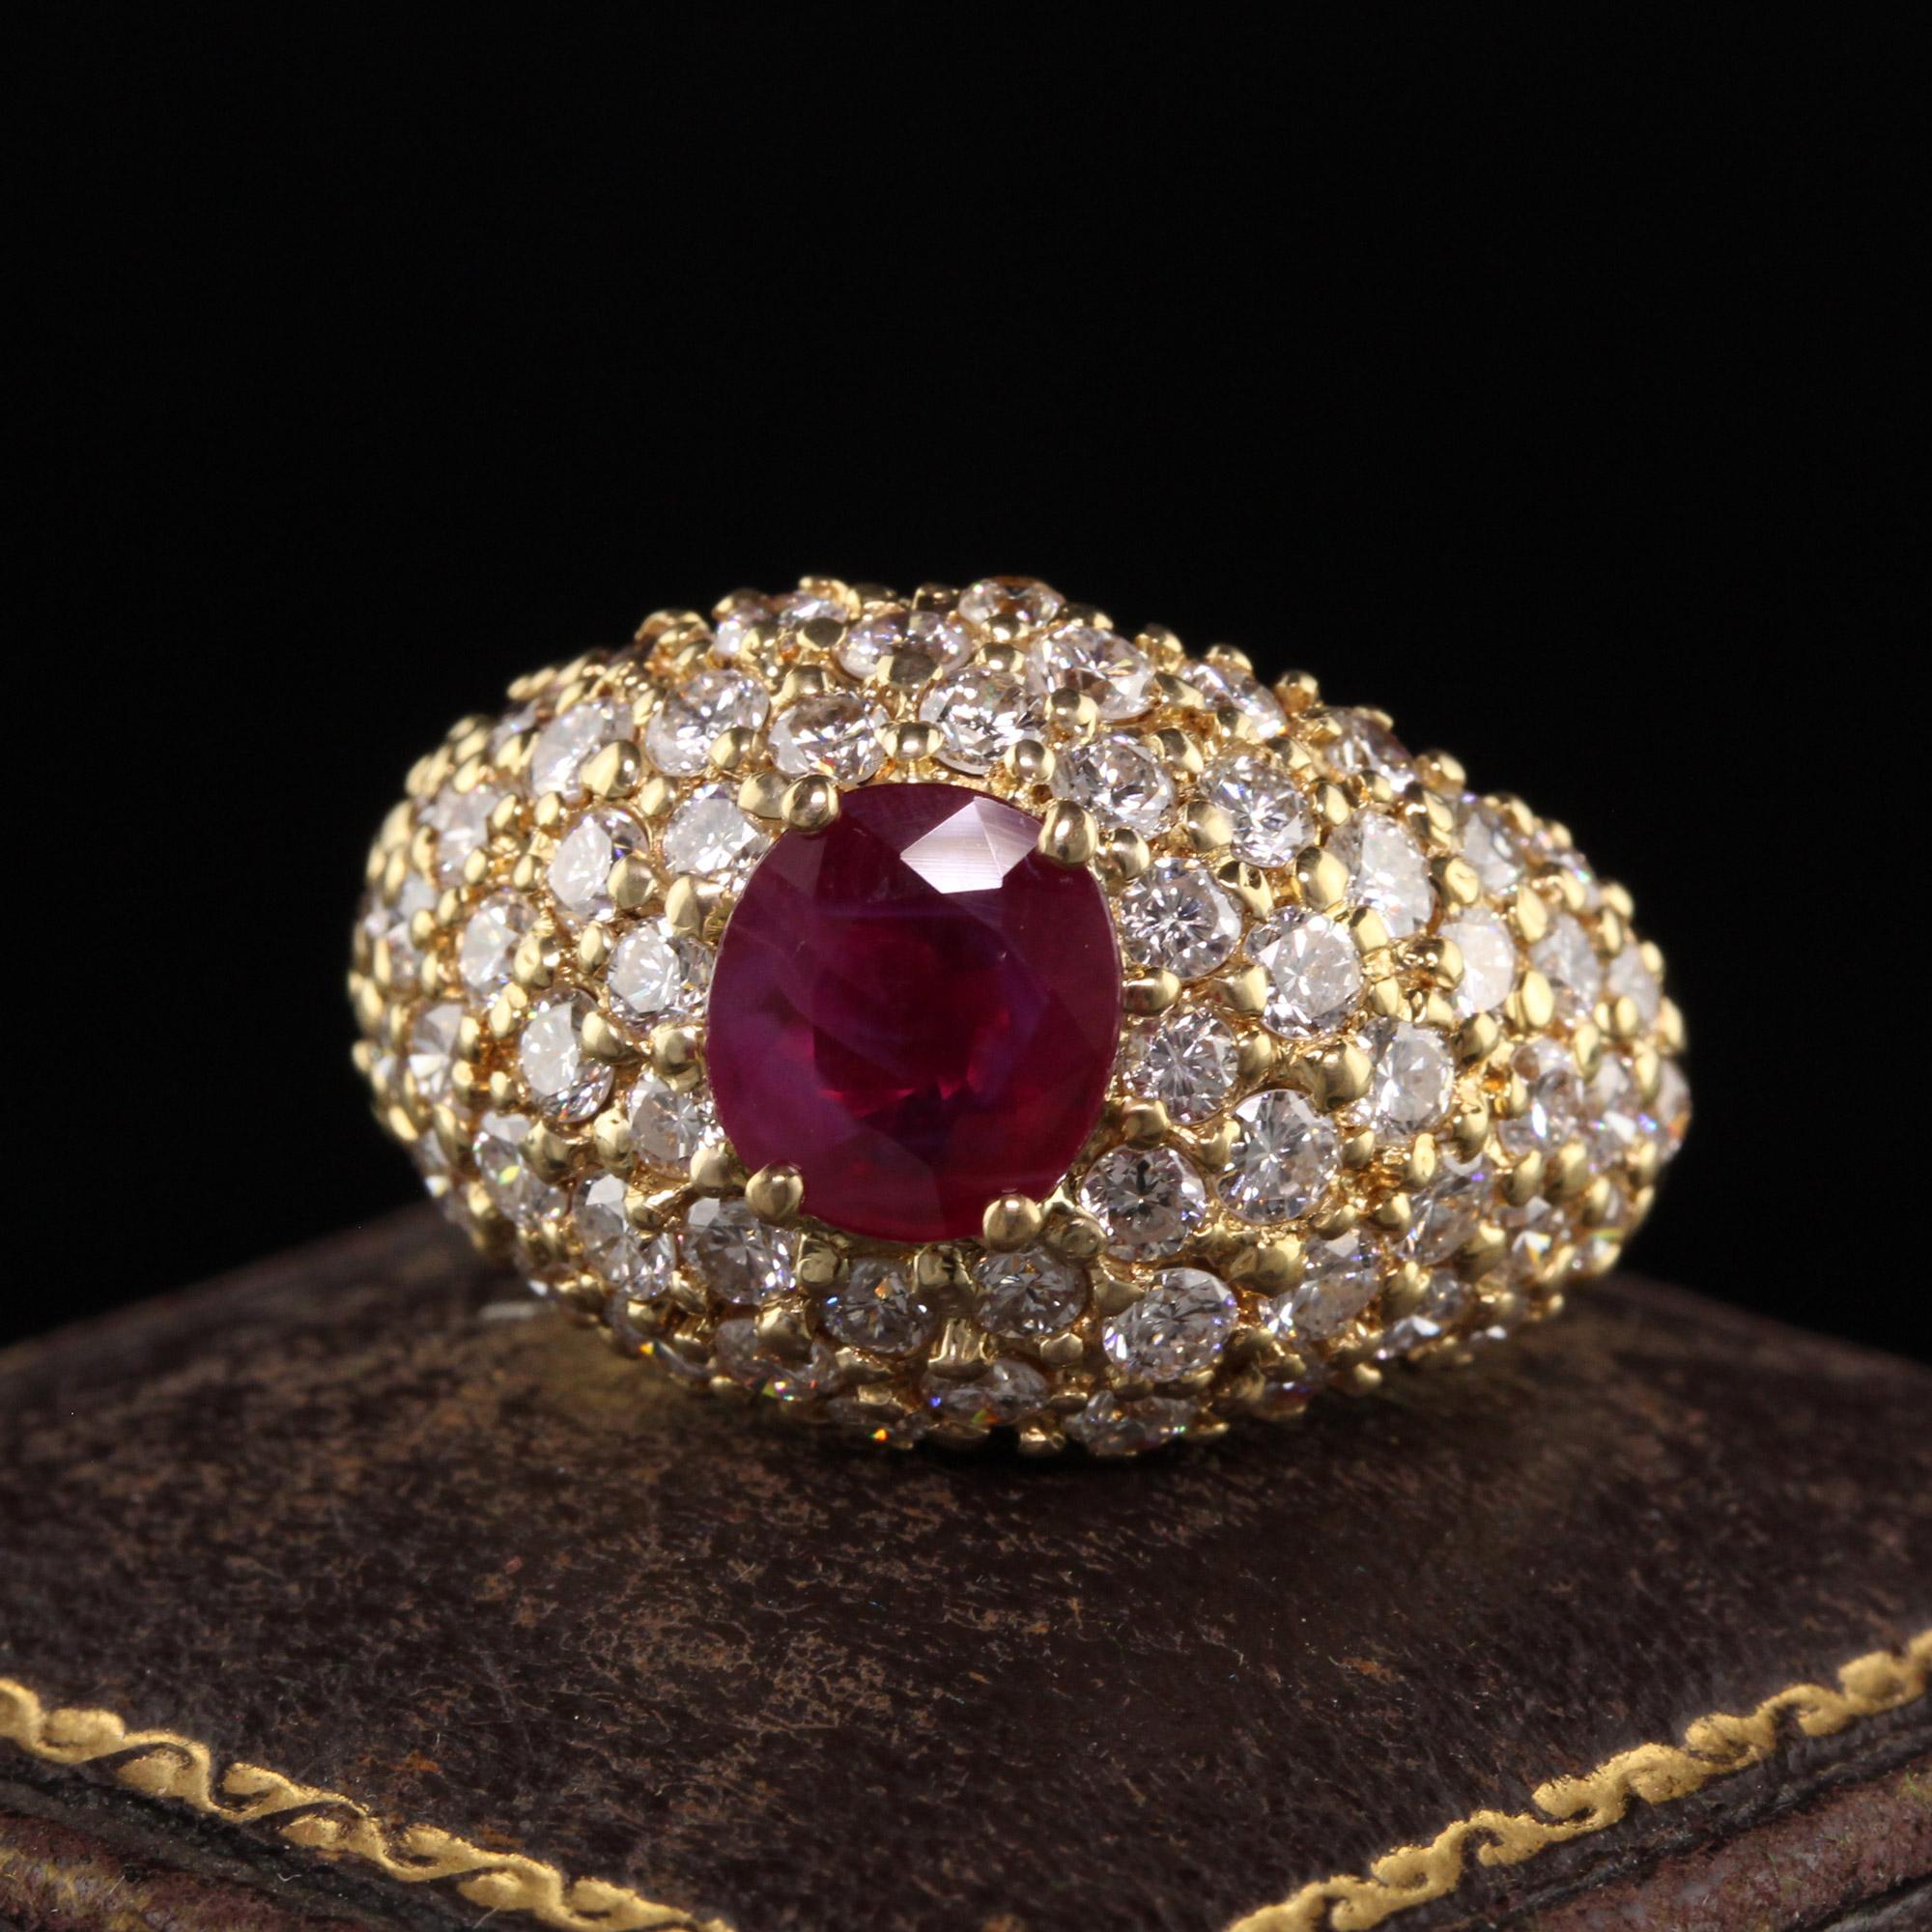 Beautiful Vintage Estate 18K Yellow Gold Burma Ruby and Diamond Ring - GIA. This beautiful ring is crafted in 18k yellow gold. The center holds a GIA certified Burma ruby with white diamonds surrounding it. It has the diamond and ruby weight